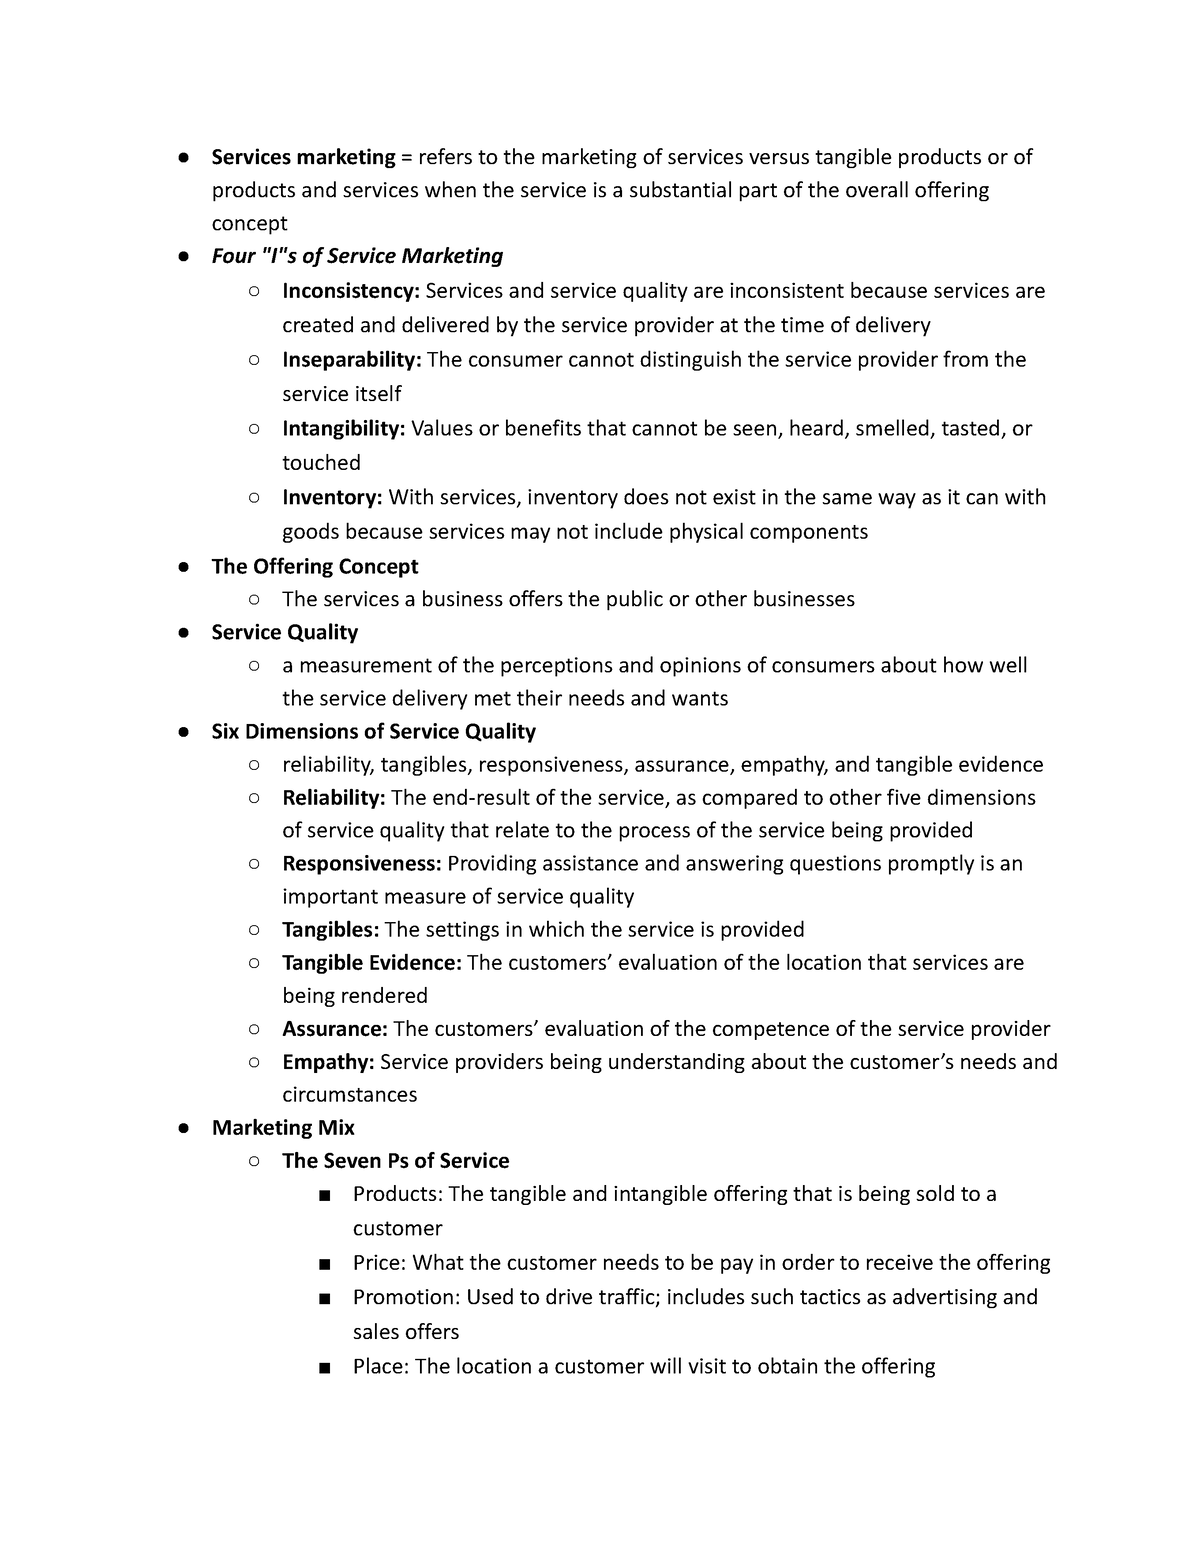 MKT 315 Ch.6 notes 1-book - Services marketing = refers to the ...